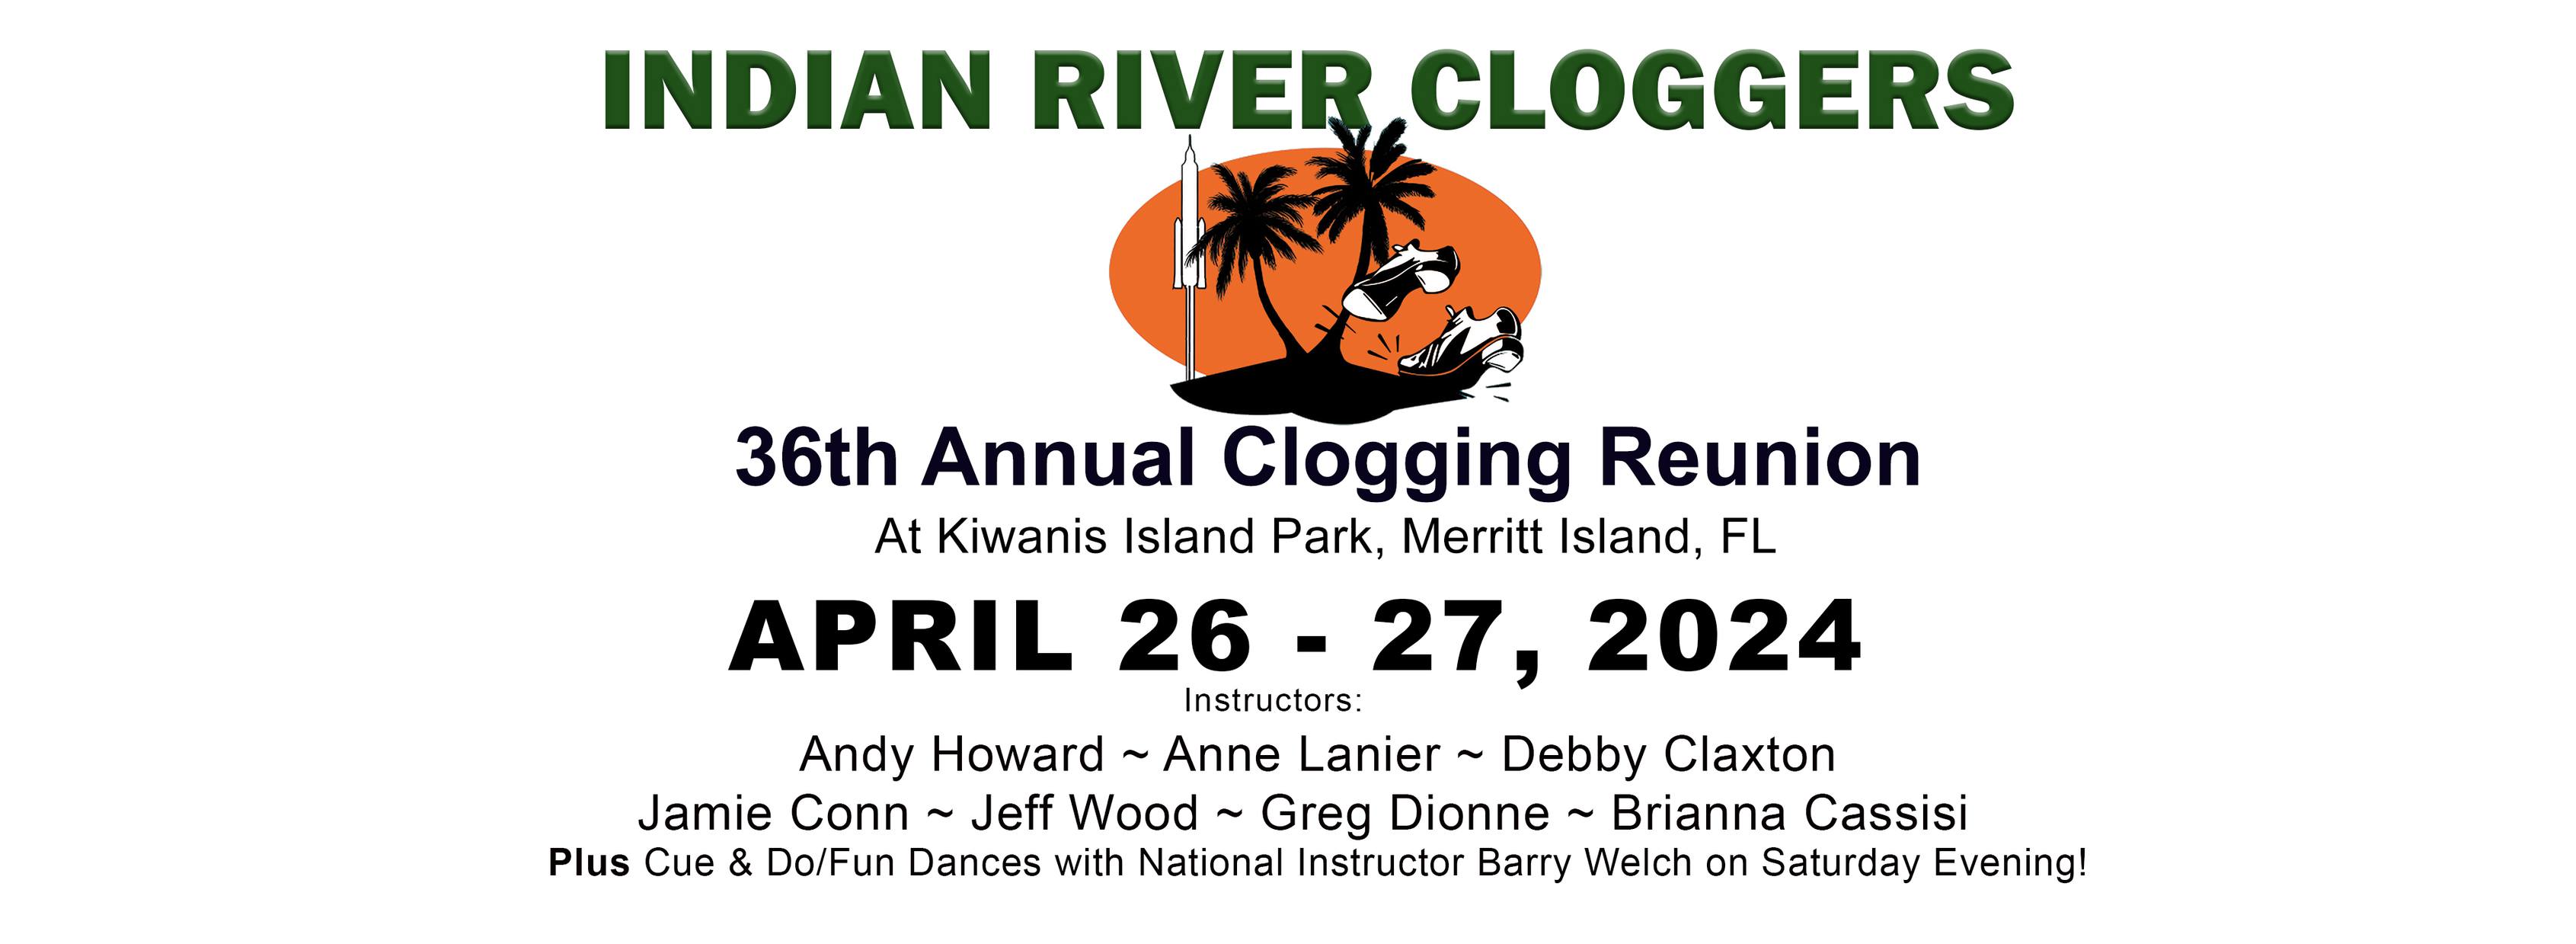 Indian River Cloggers